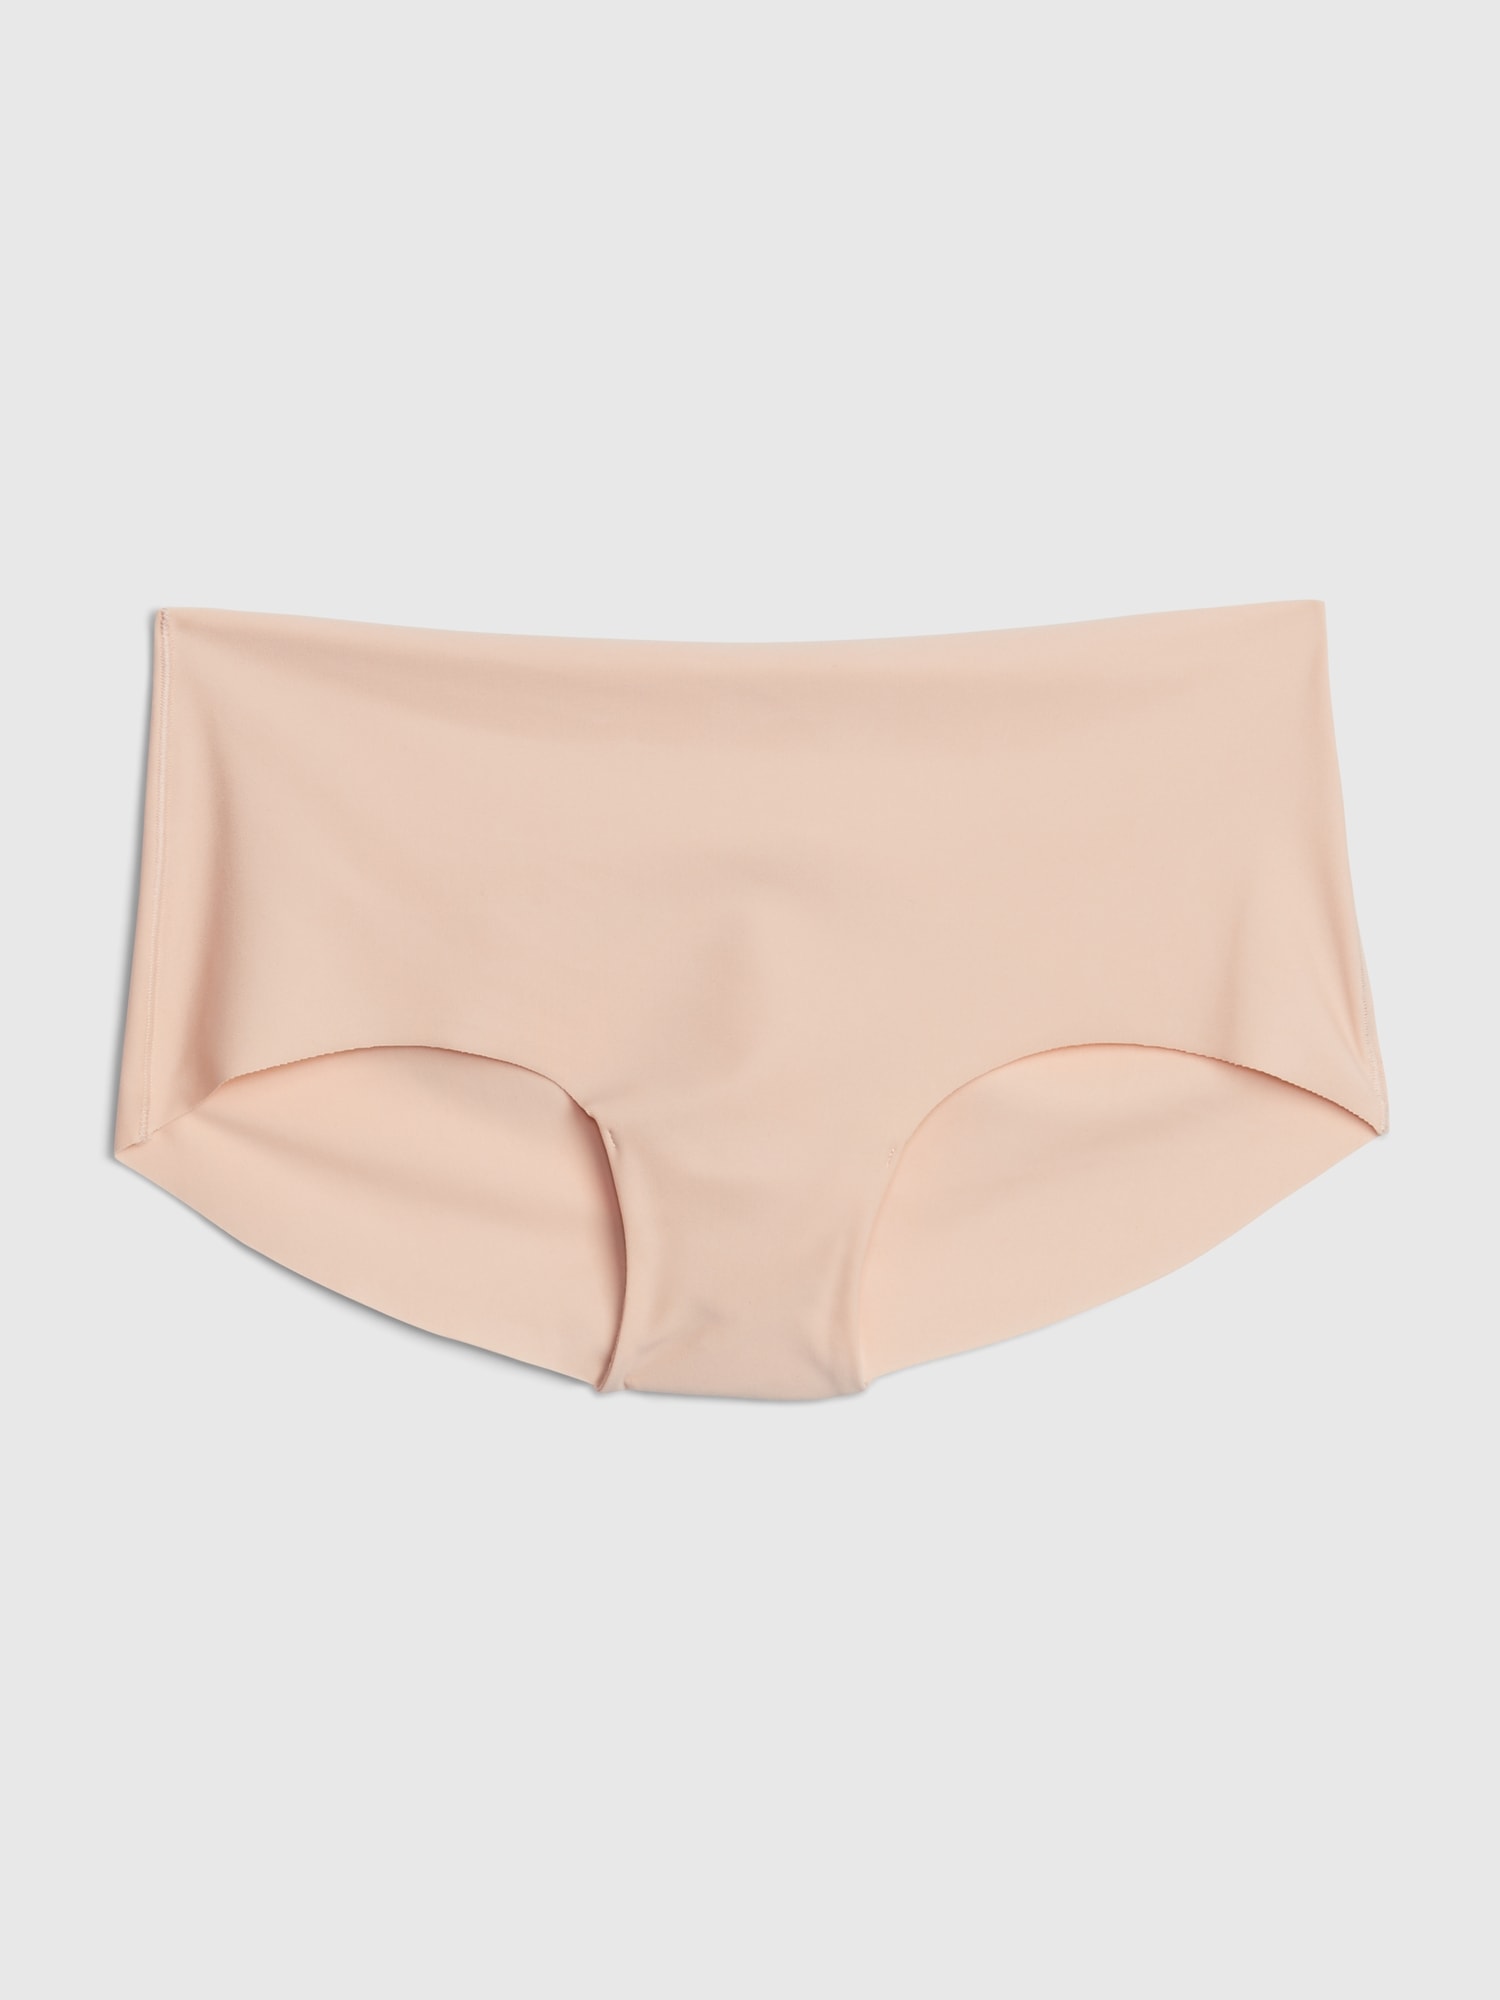 GAP Womens 3-pack No Show Underpants Underwear Hipster Panties, Cafe Au  Lait, Large US at  Women's Clothing store